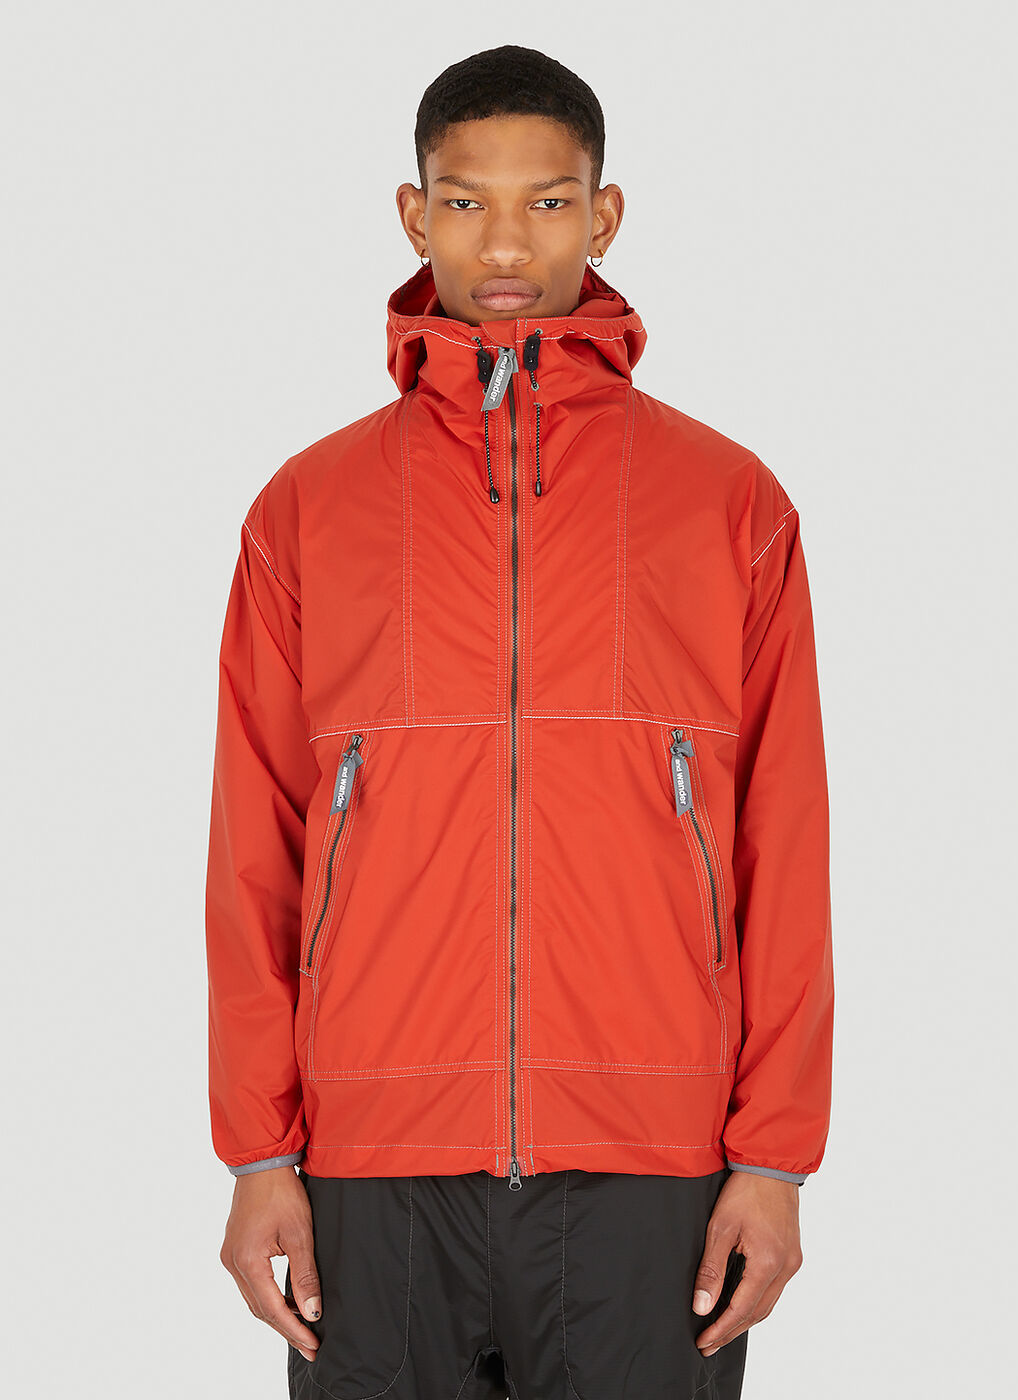 Pertex Wind Jacket in Red and Wander